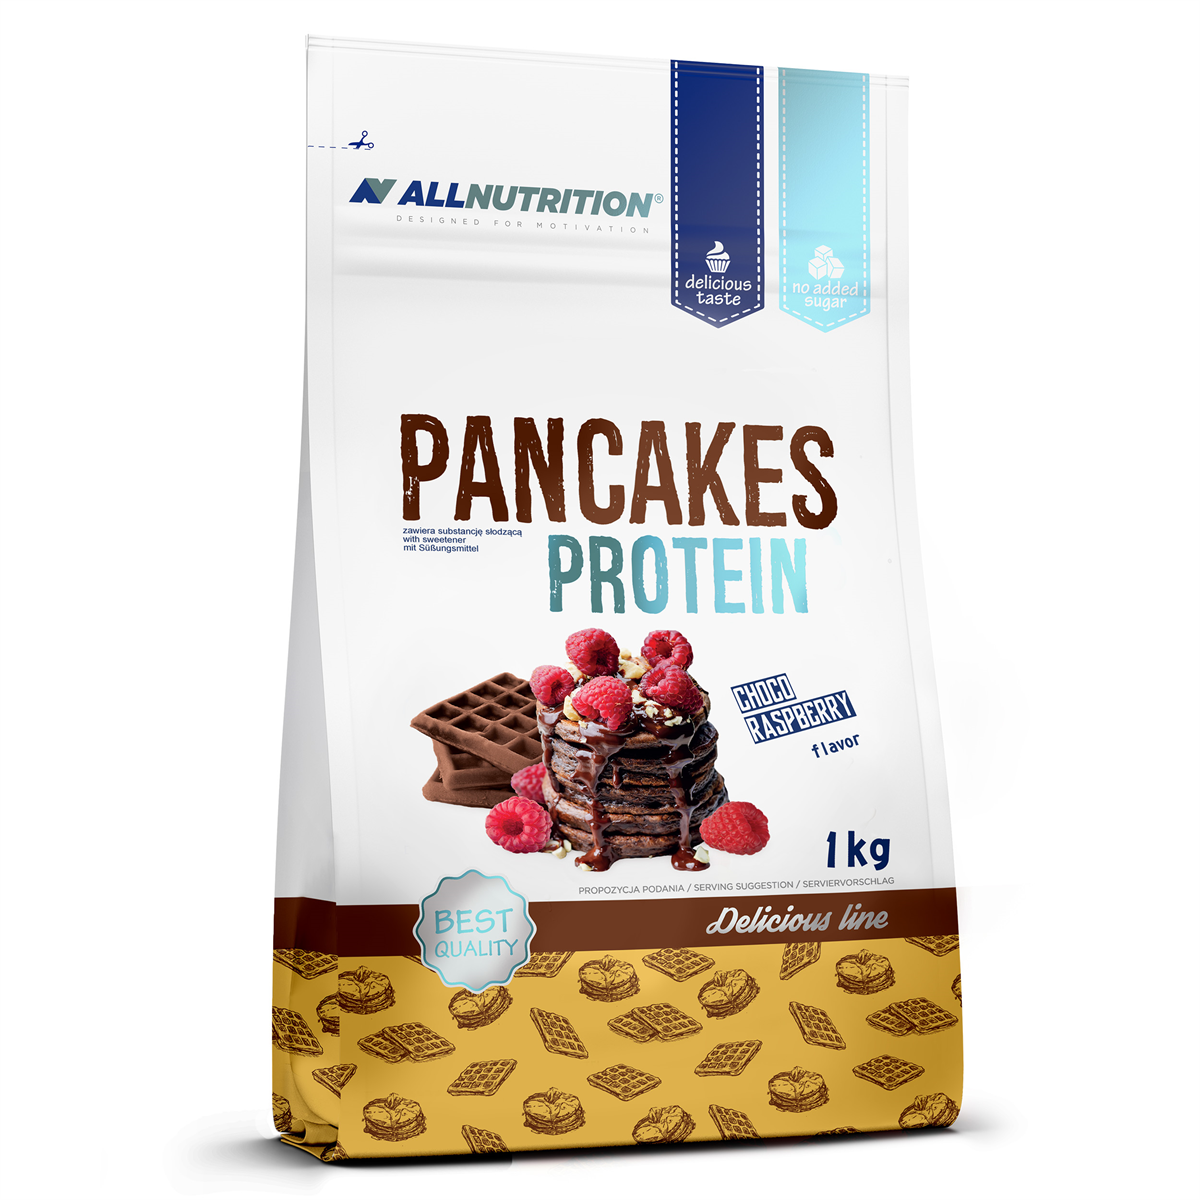 Heracles Nutrition - PROTEIN PANCAKE 50G